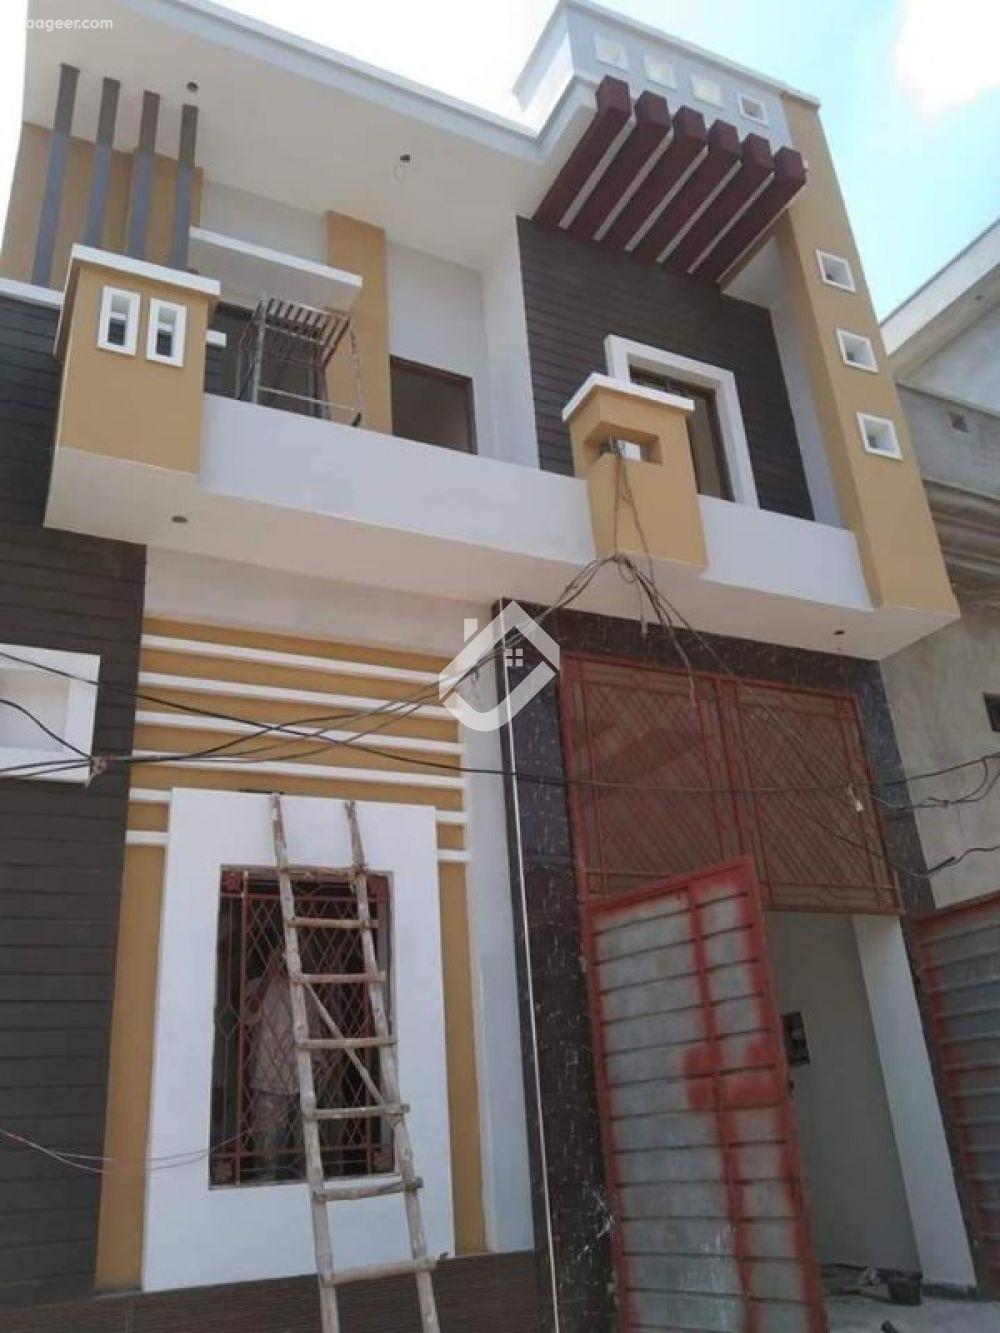 View  4 Marla Double Storey House For Sale In Gujranwala Rd in Gujranwala Rd, Sheikhupura